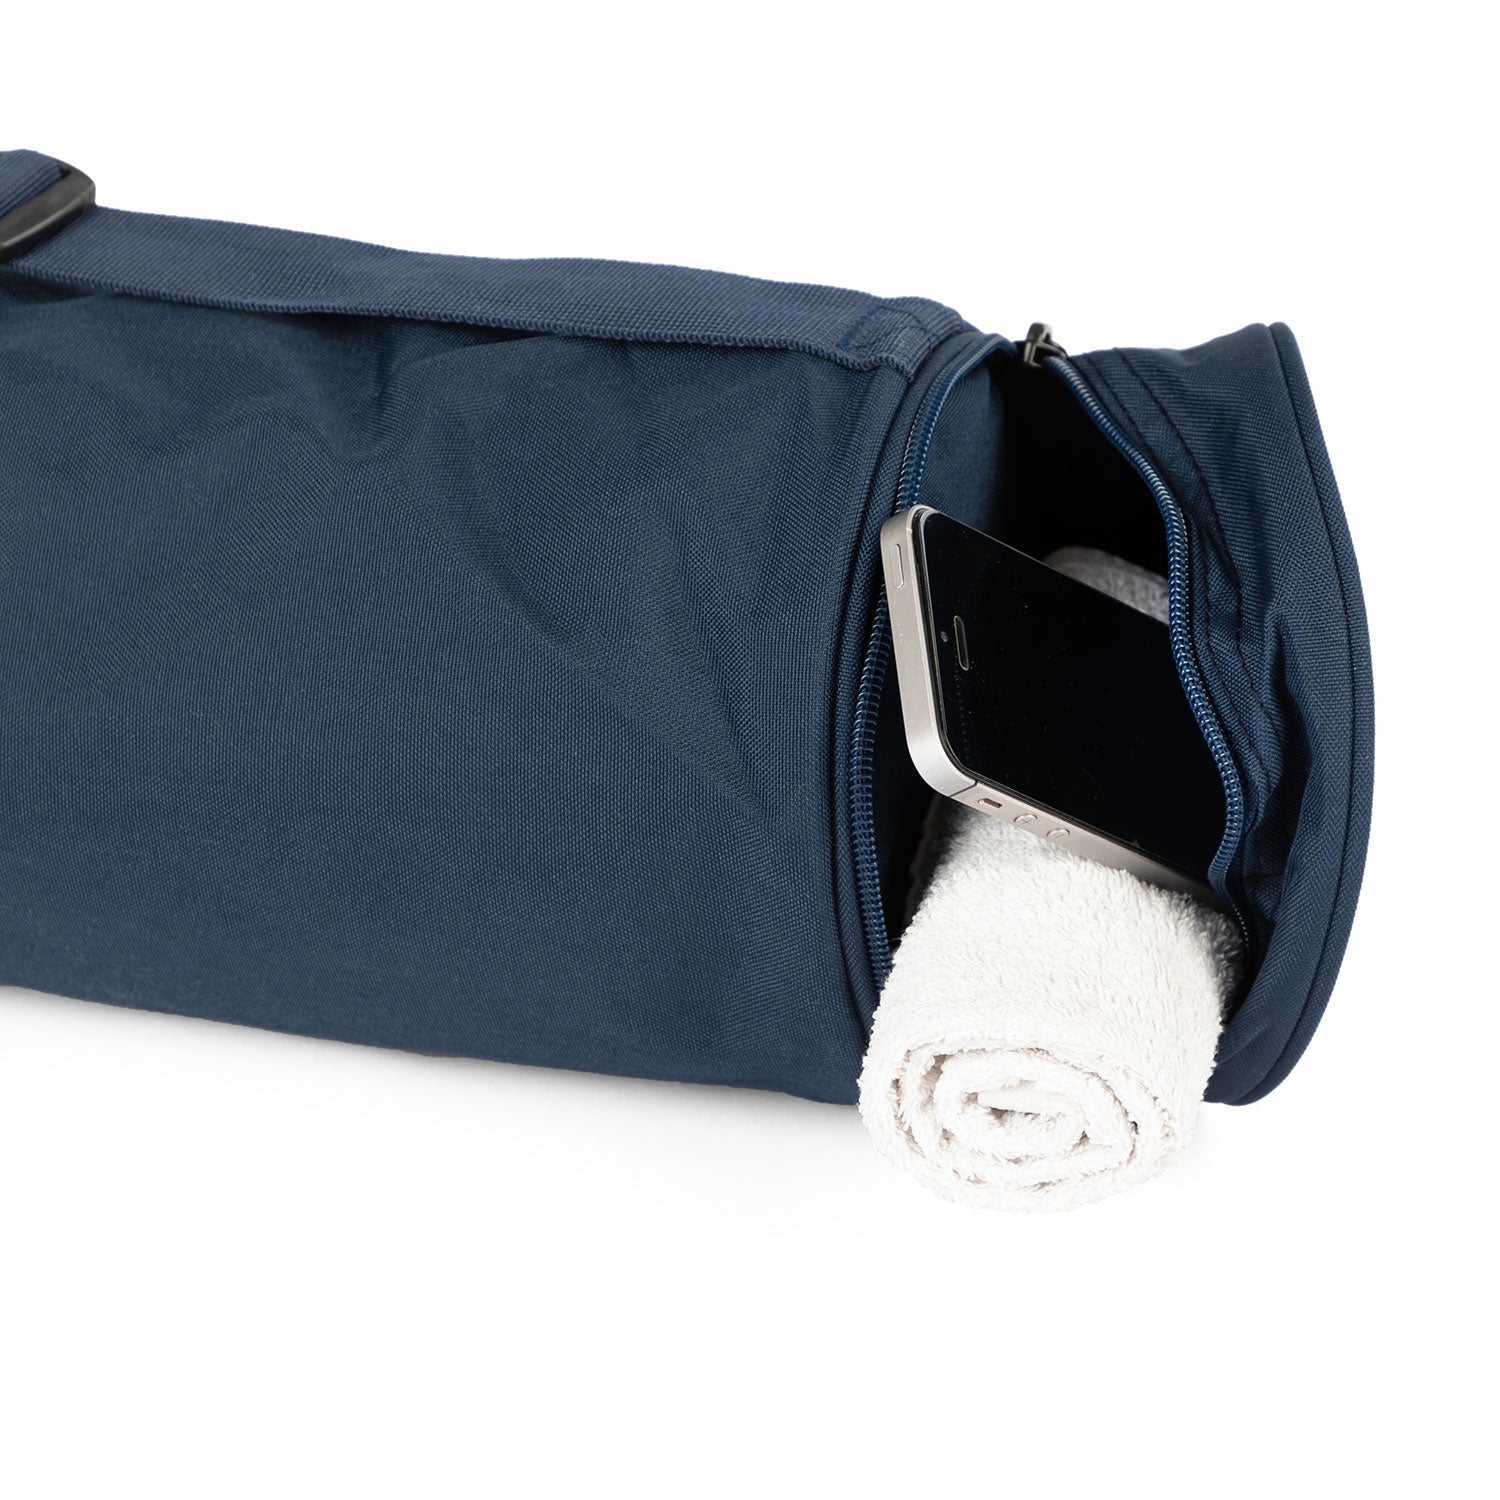  Manduka Yoga Breathe Easy Mat Carrier - Lightweight,  Breathable Mesh with Zipper Closure, Easy to Carry, Hands-Free, Black, 1  EA, 26.5” x 6.5” x 6.5” : Sports & Outdoors